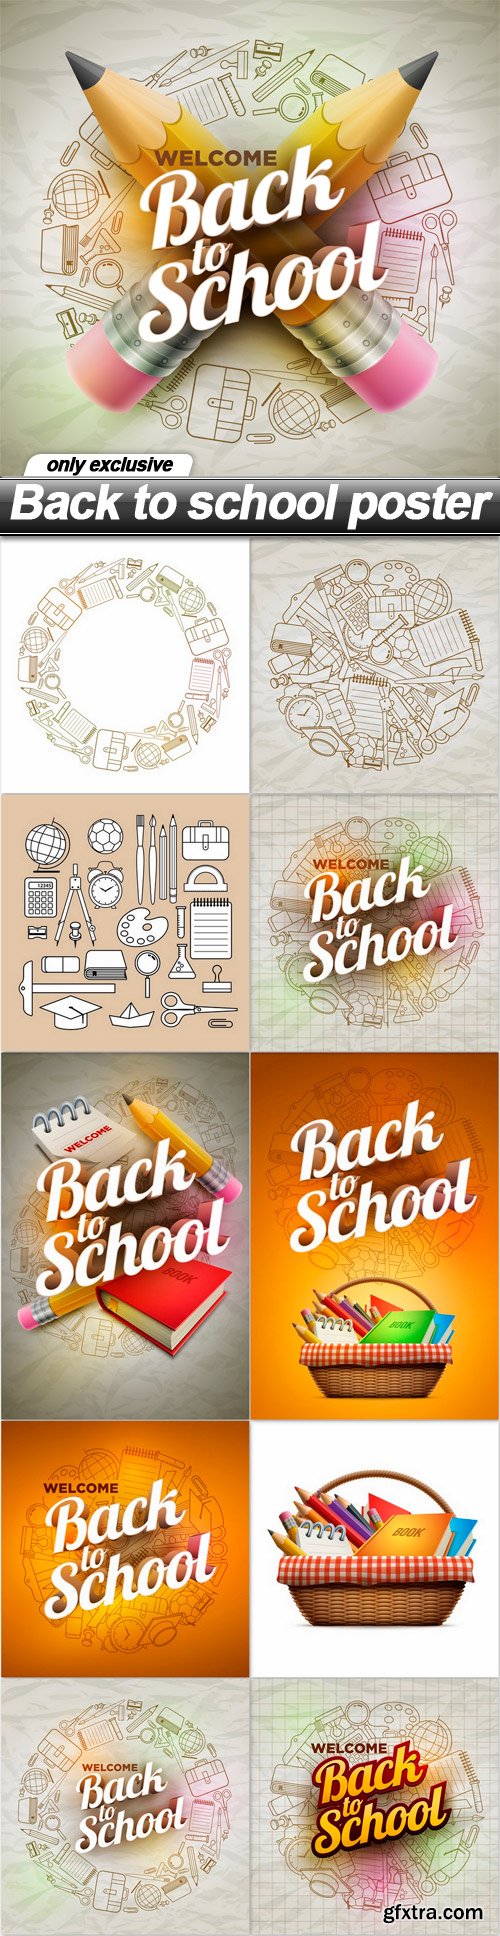 Back to school poster - 11 EPS